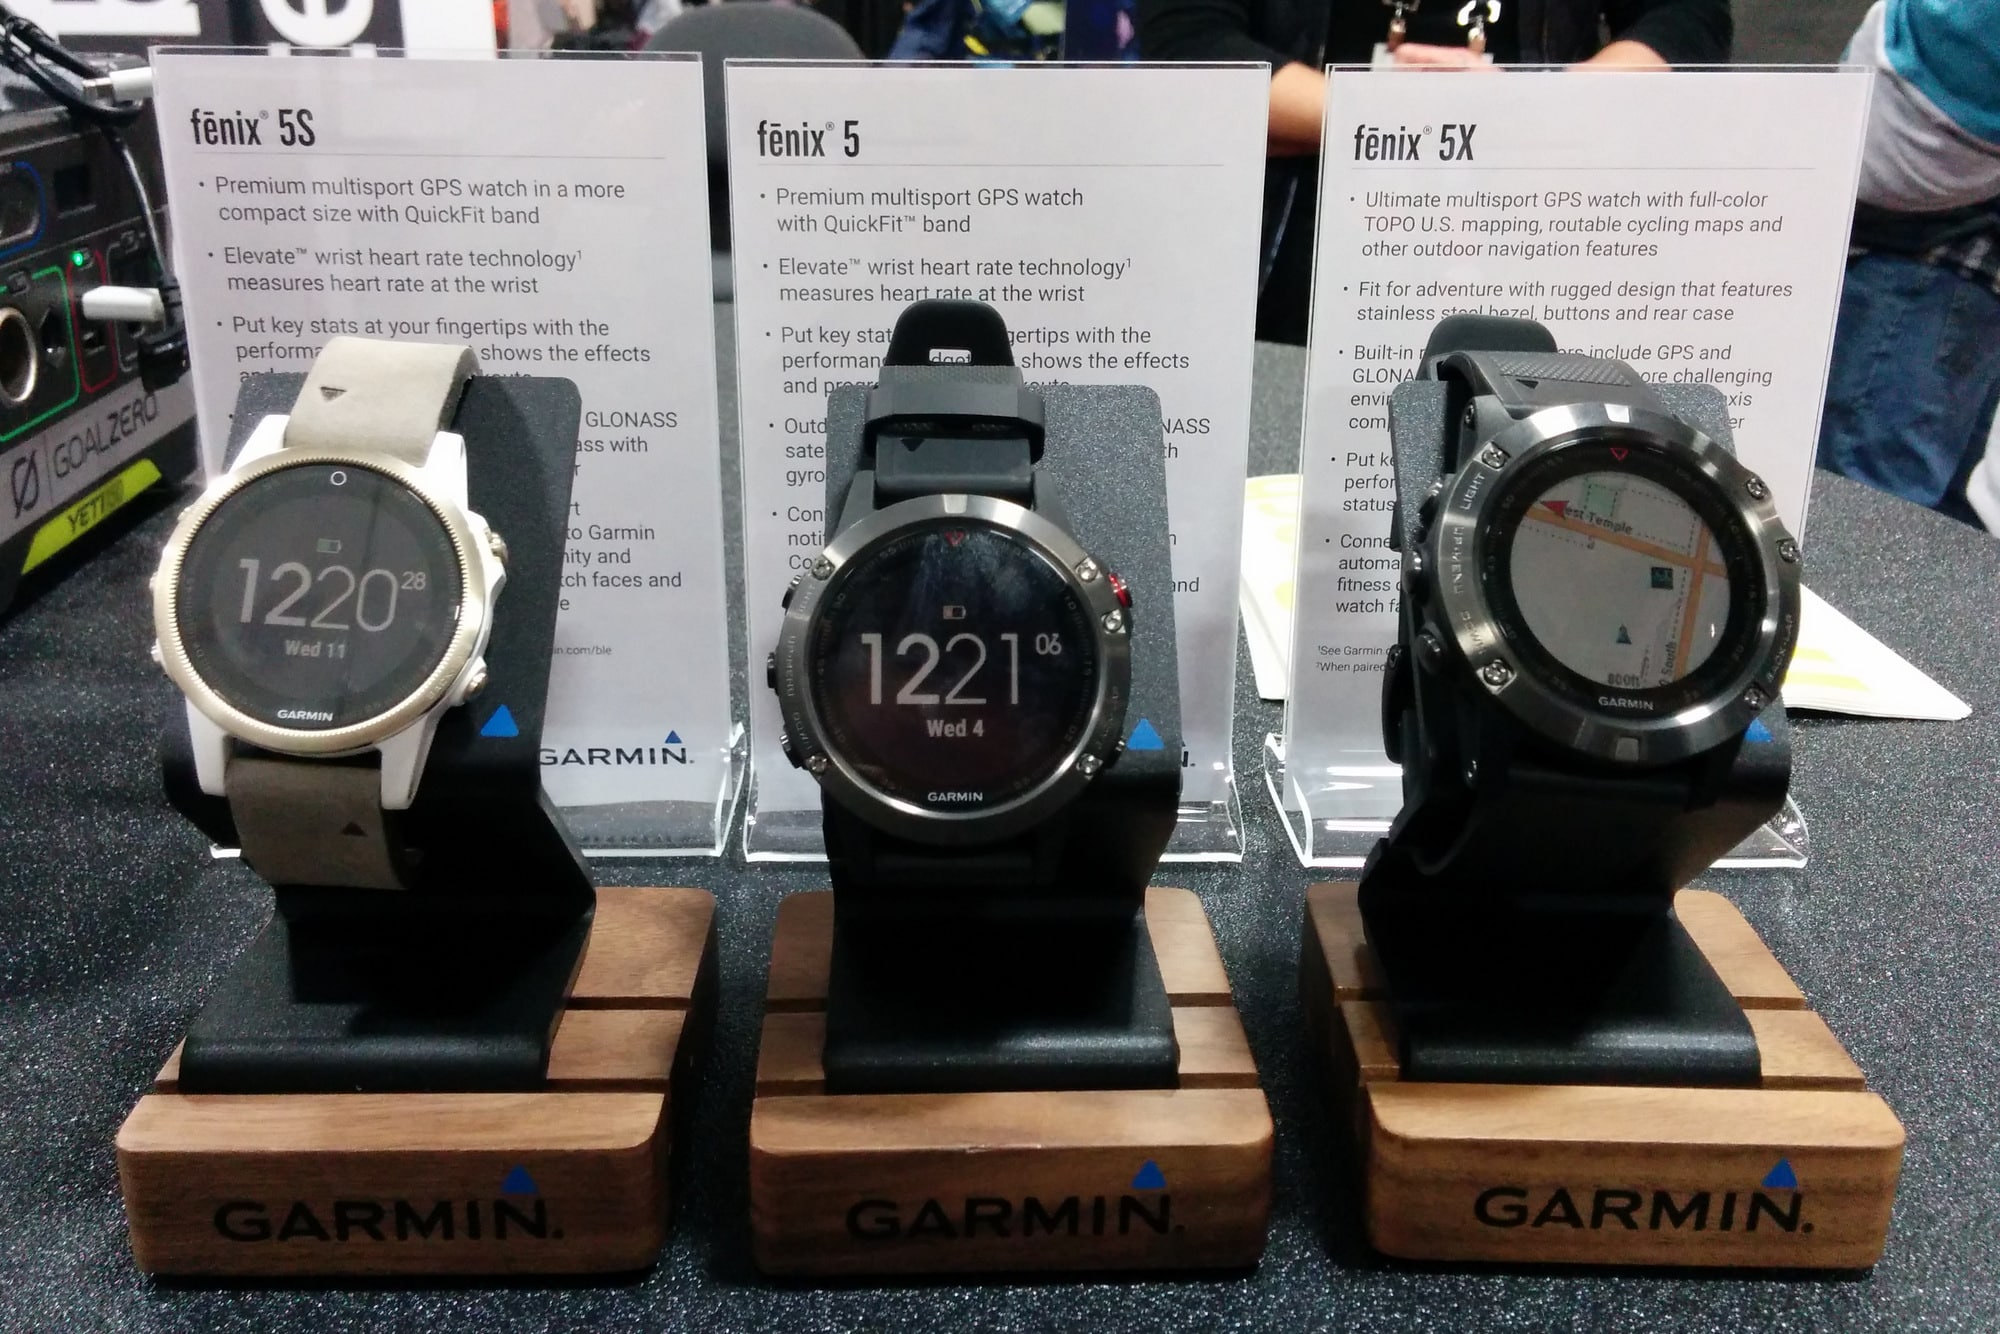 Preview: Garmin Fenix 5, 5S, and 5X maps!) GPS sport watches